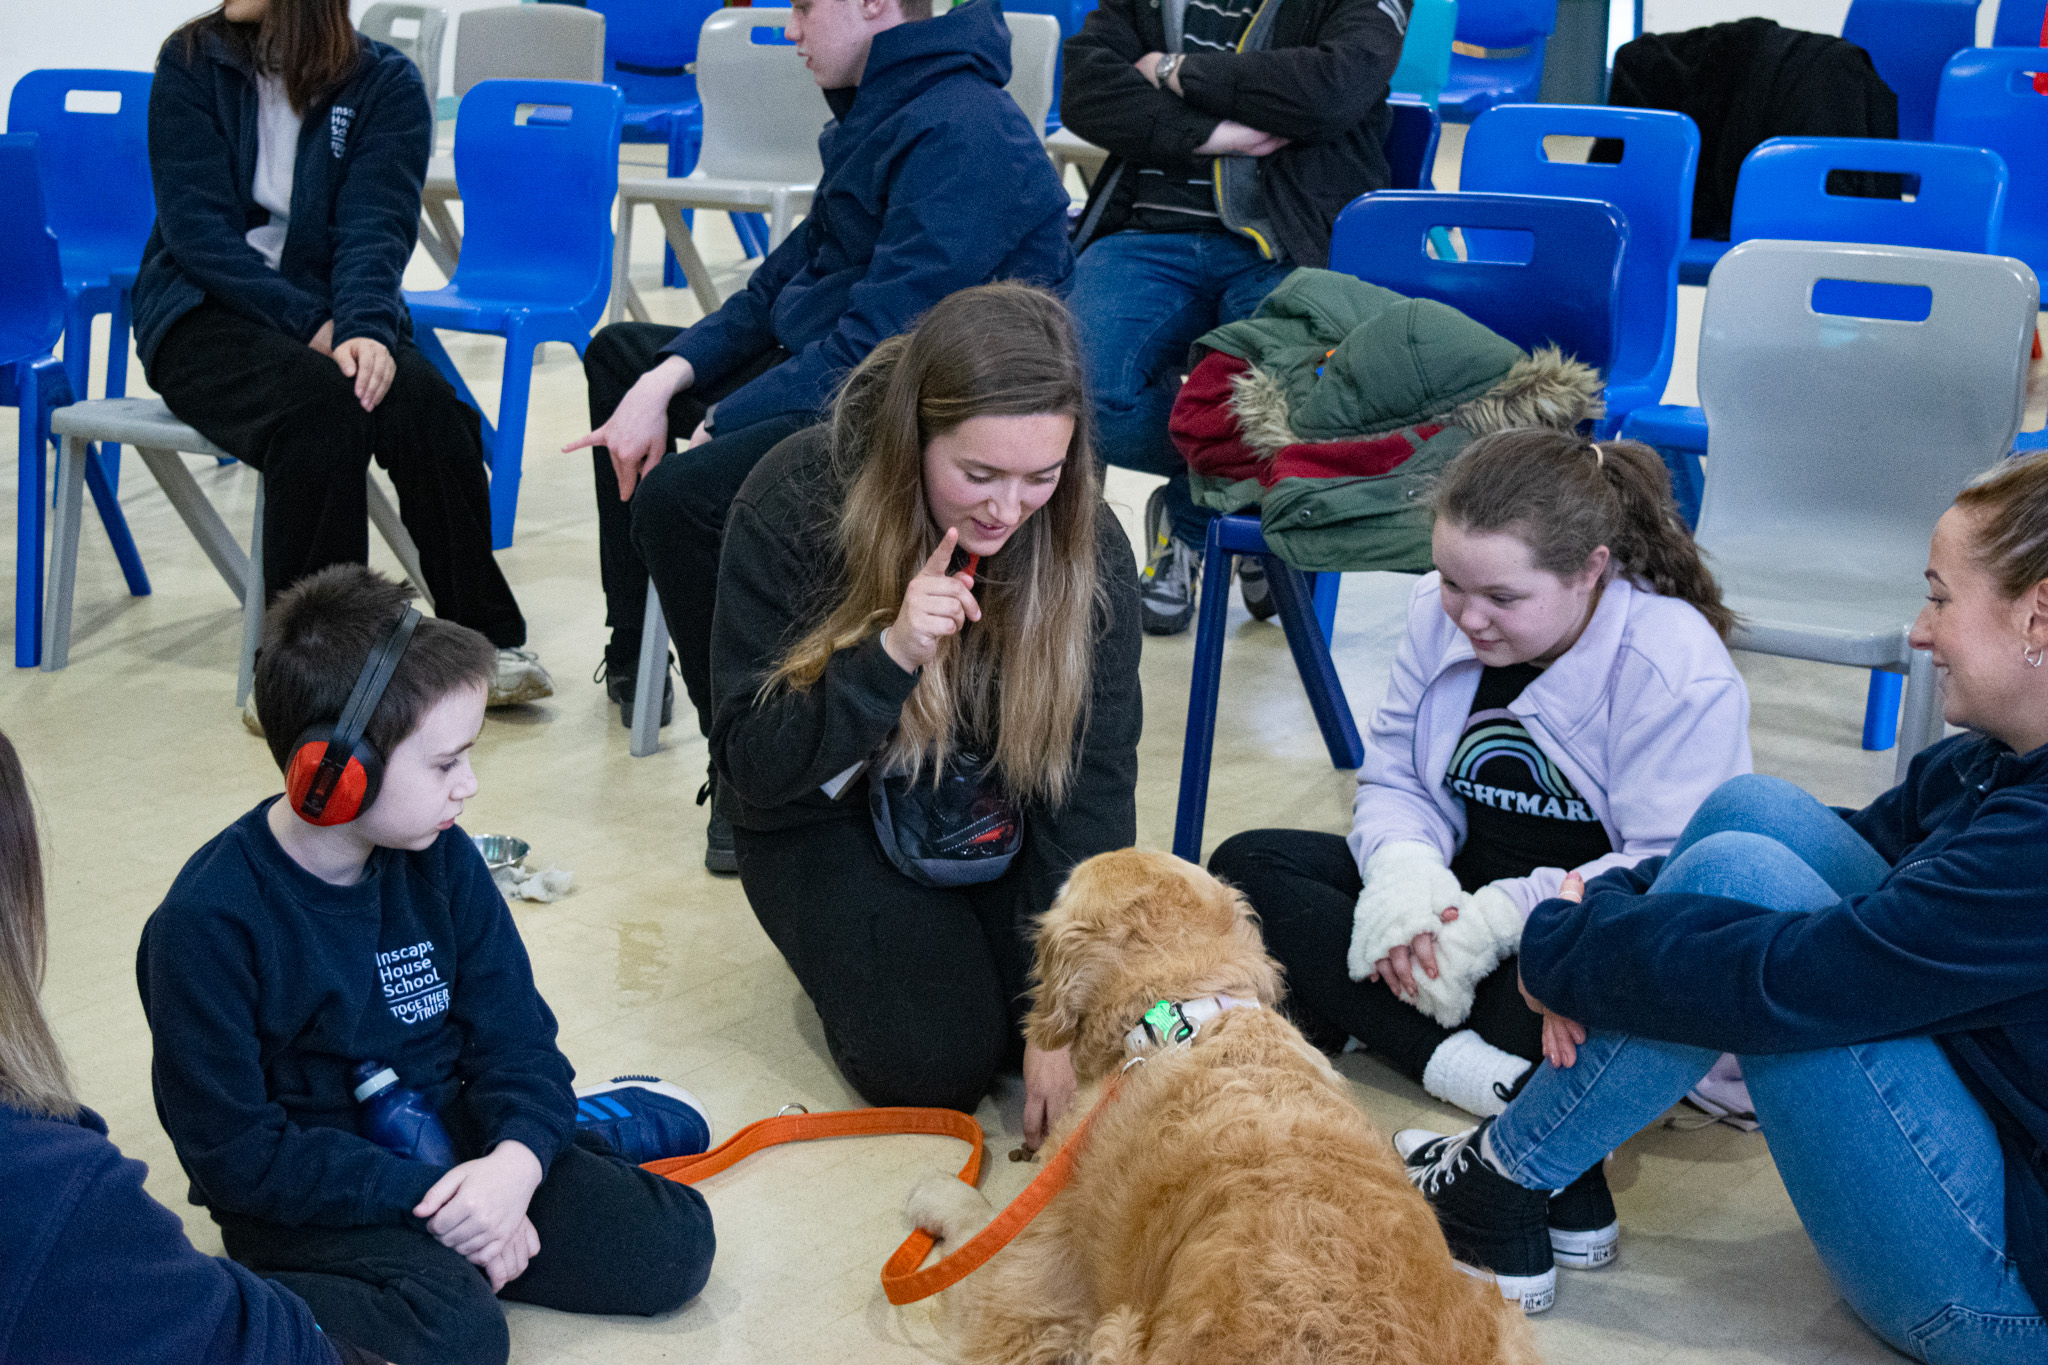 Two young students - one boy with large red headphones and a girl - watch as Laura interacts with Summer, a golden retriever.